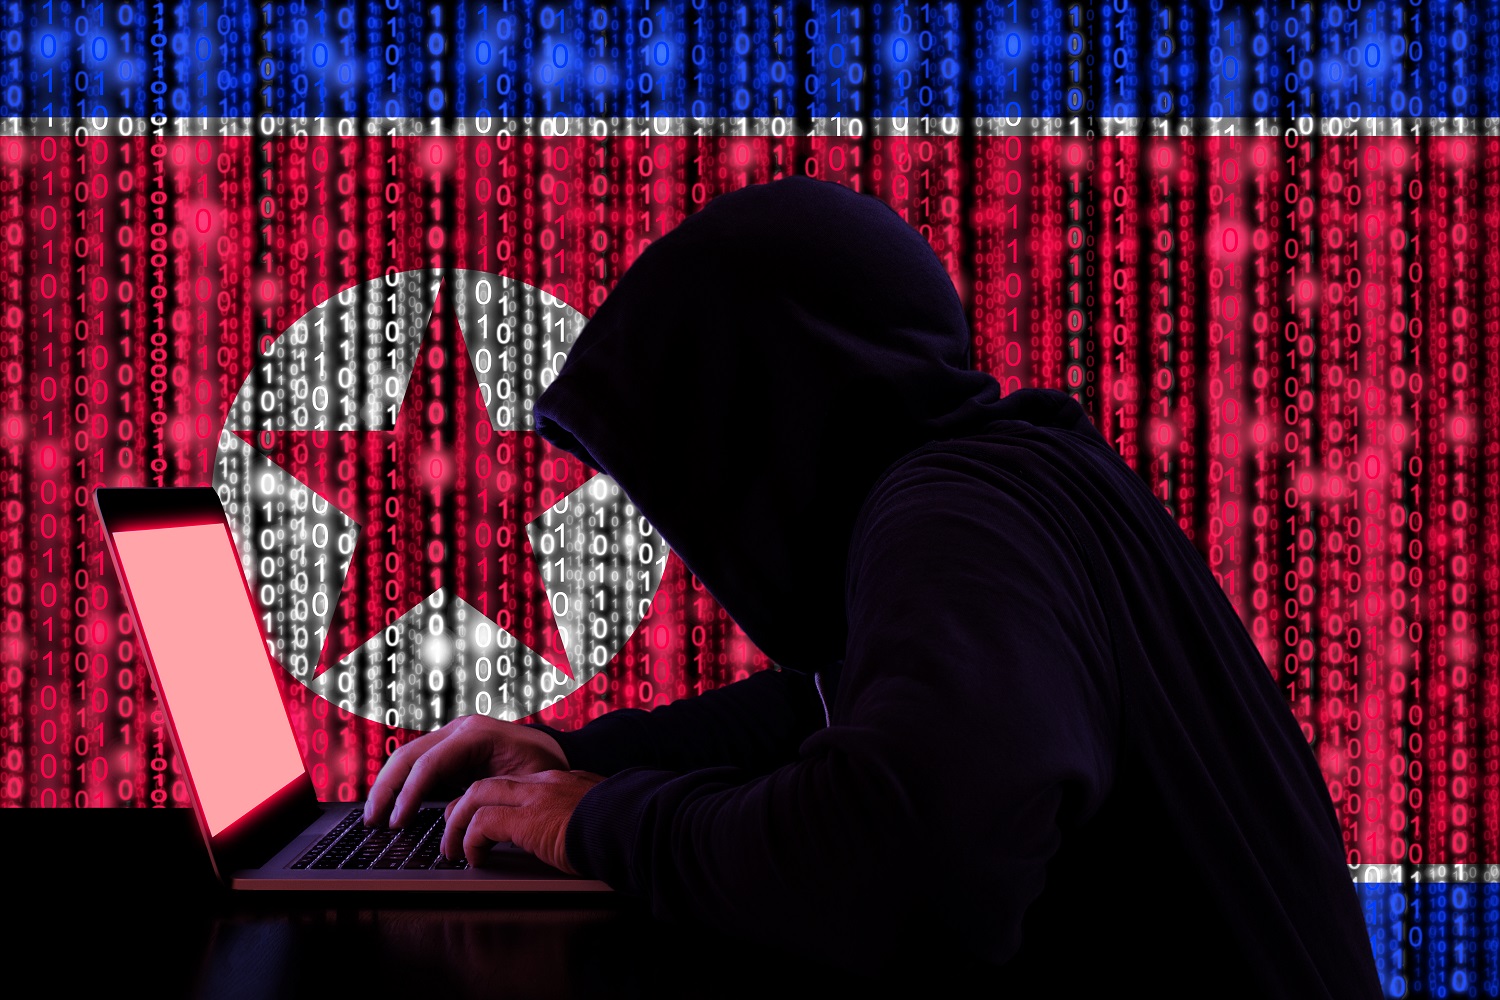 A hooded person works on a laptop against the backdrop of a North Korea flag composed of binary code.